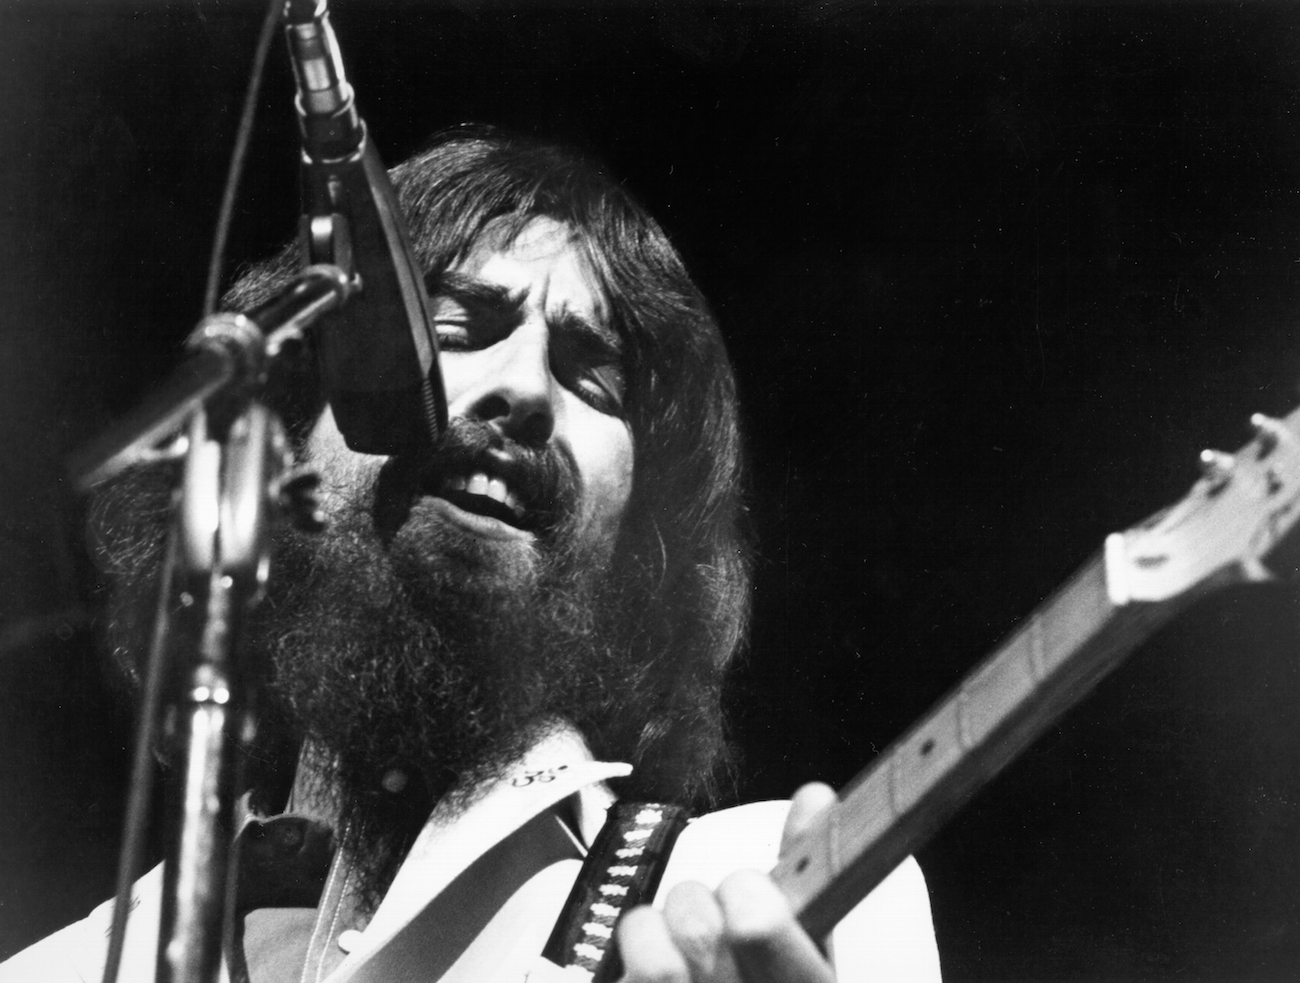 George Harrison performing in white at the Concert for Bangladesh in 1971.